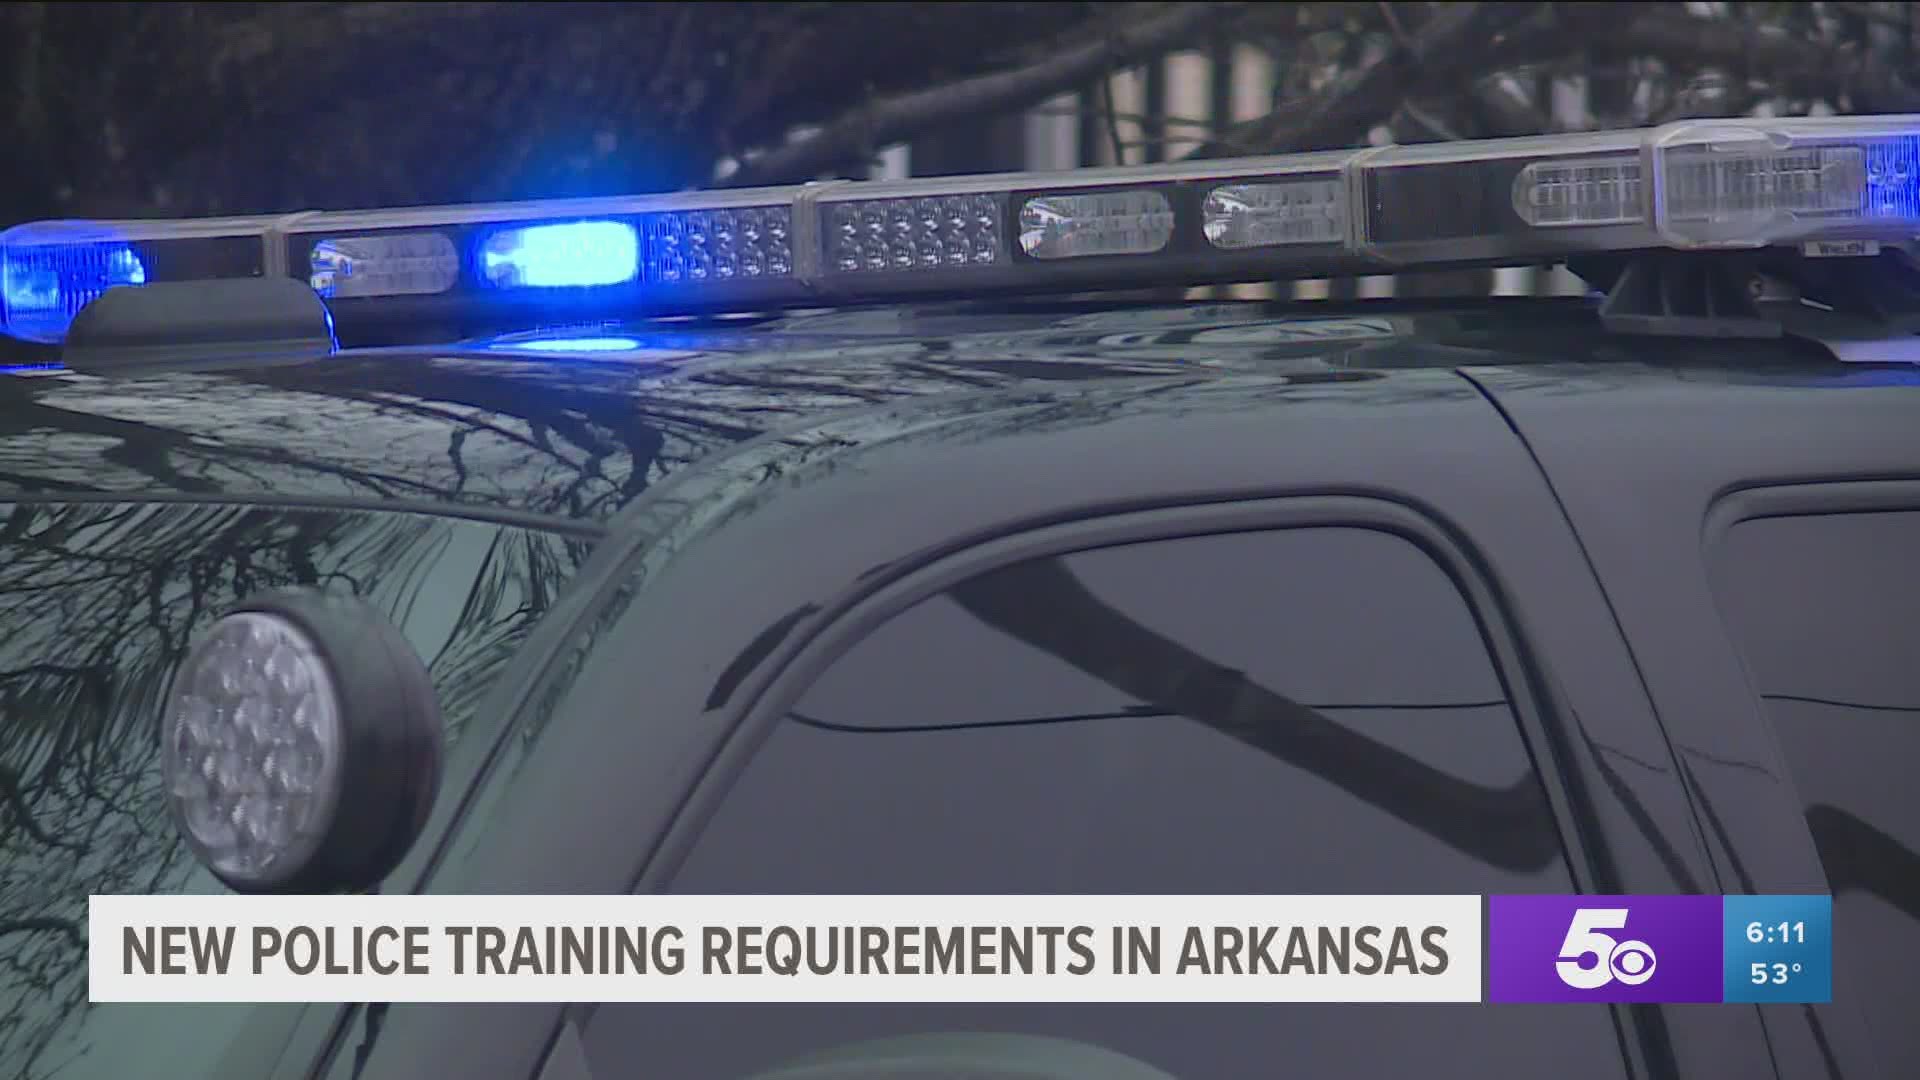 New police training requirements in Arkansas